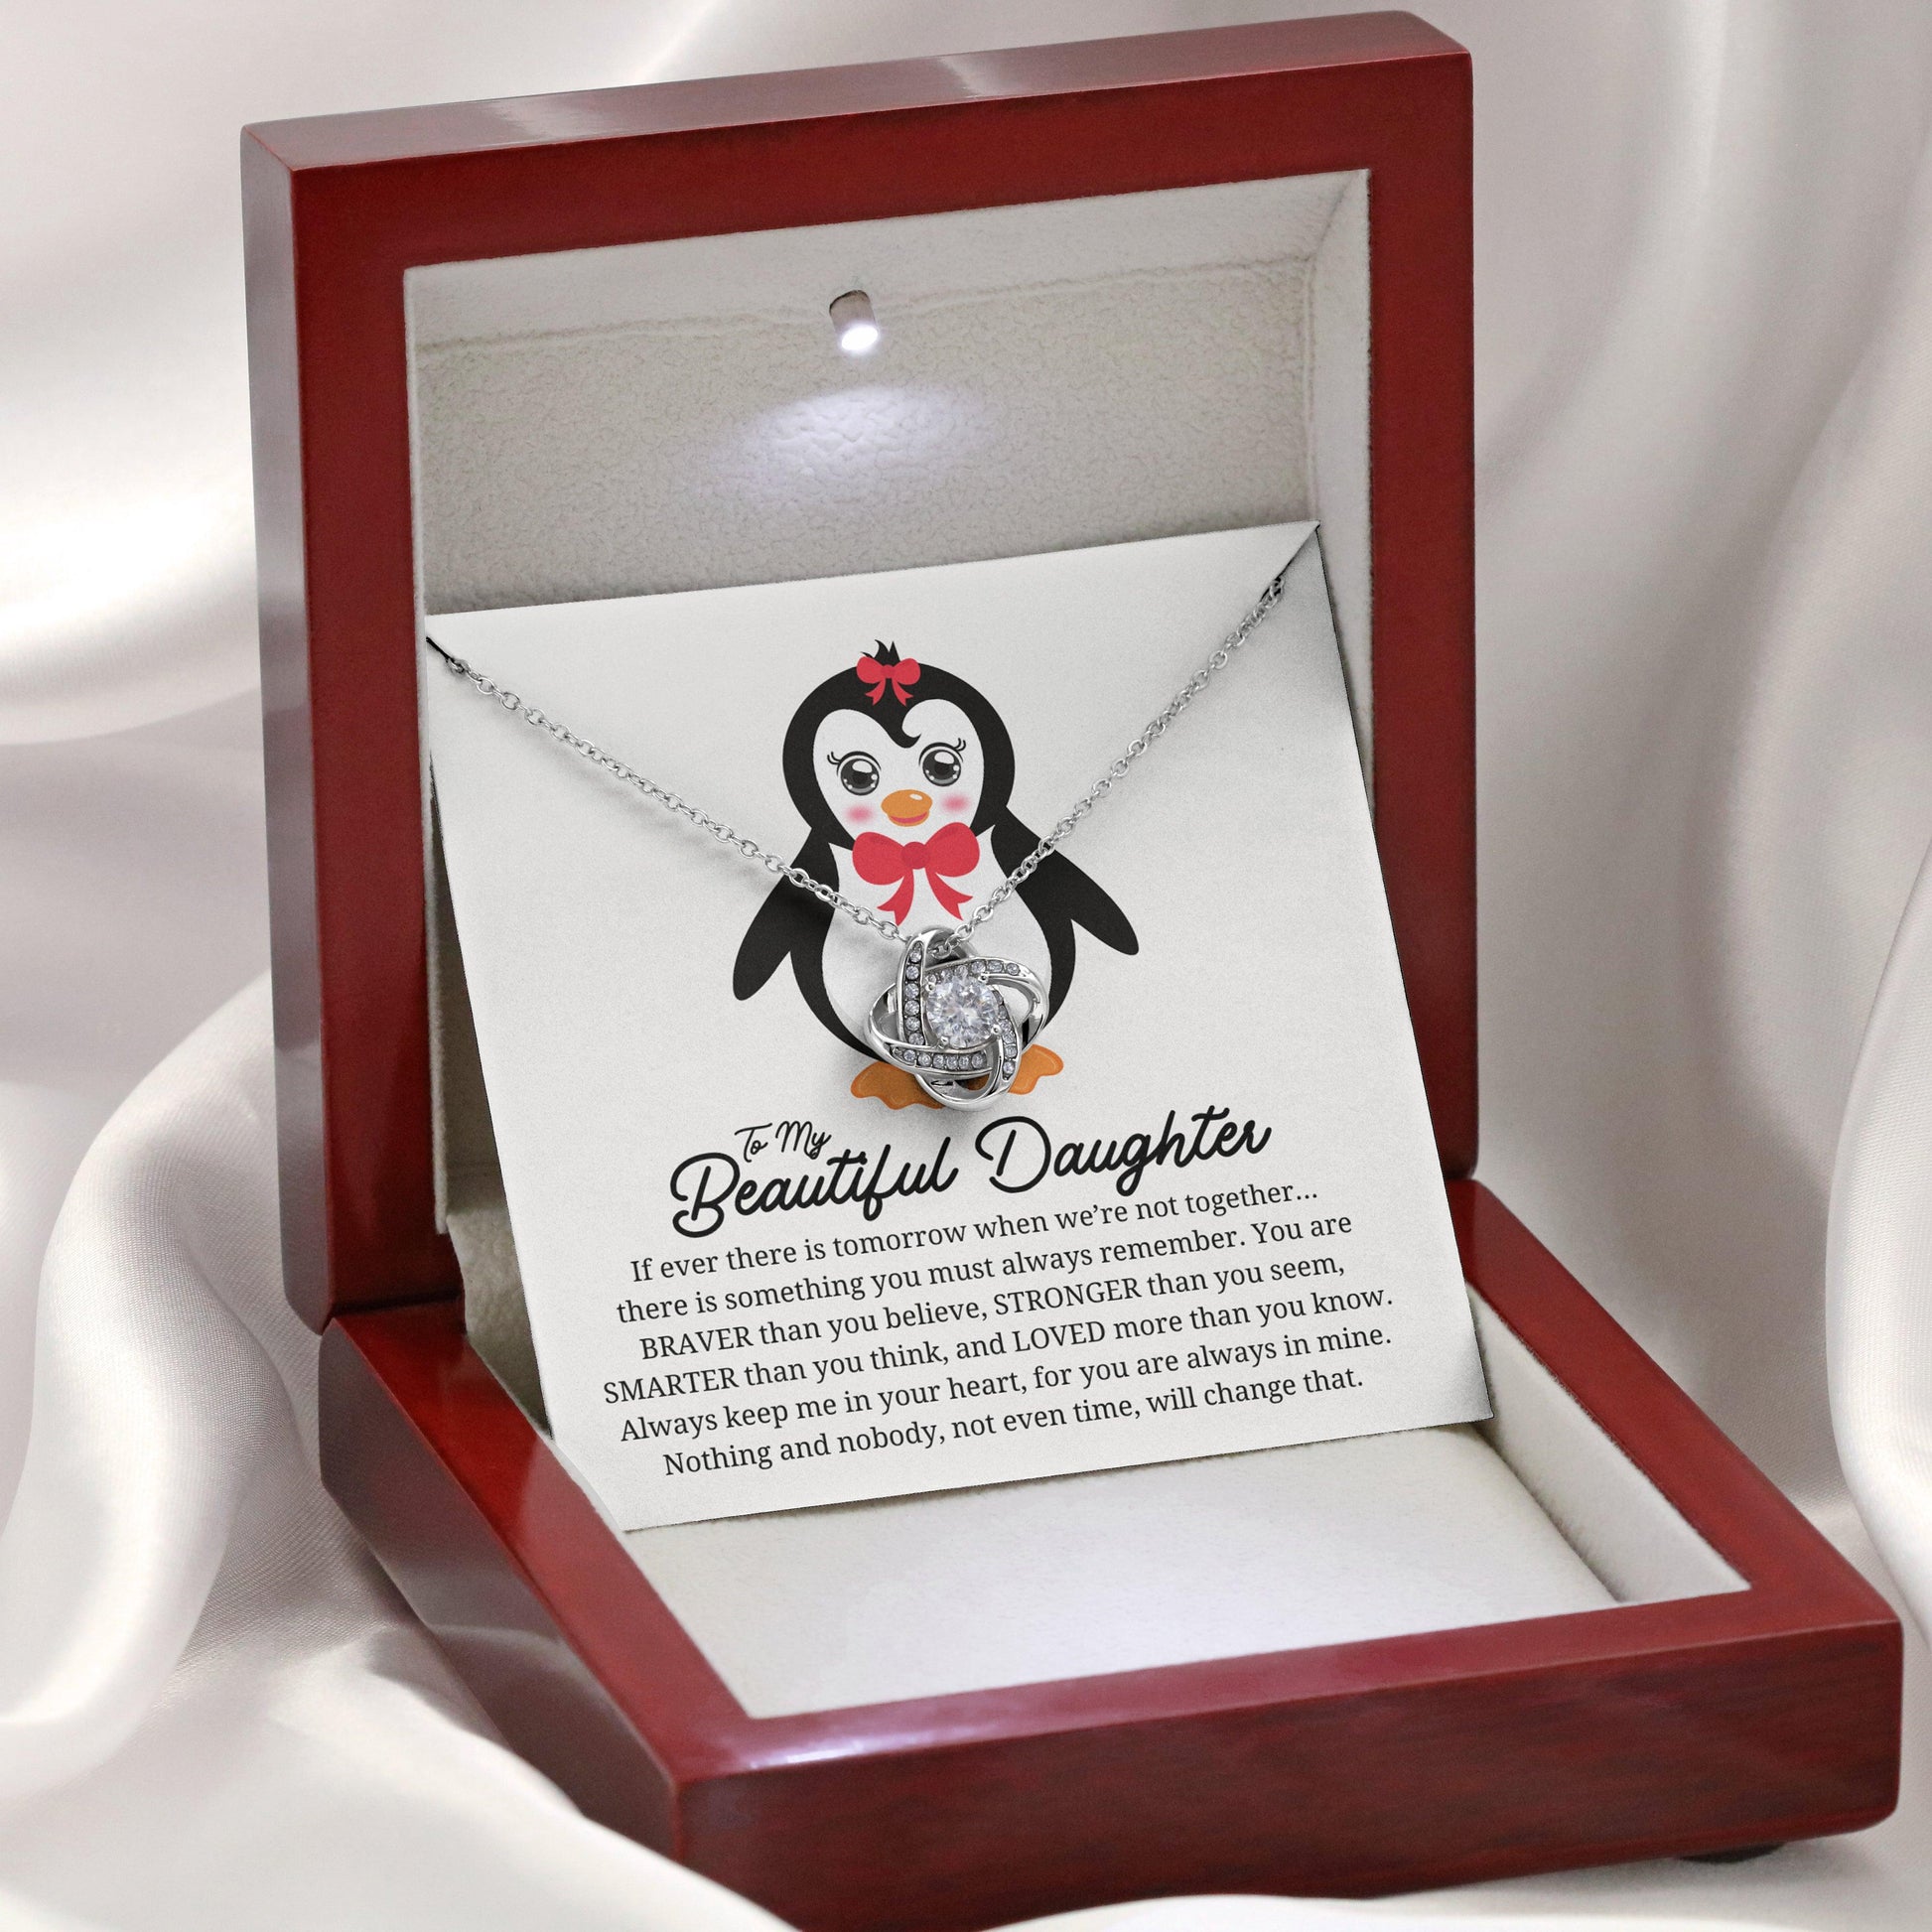 Jewelry gifts Daughter - Strong Love - Necklace - Belesmé - Memorable Jewelry Gifts